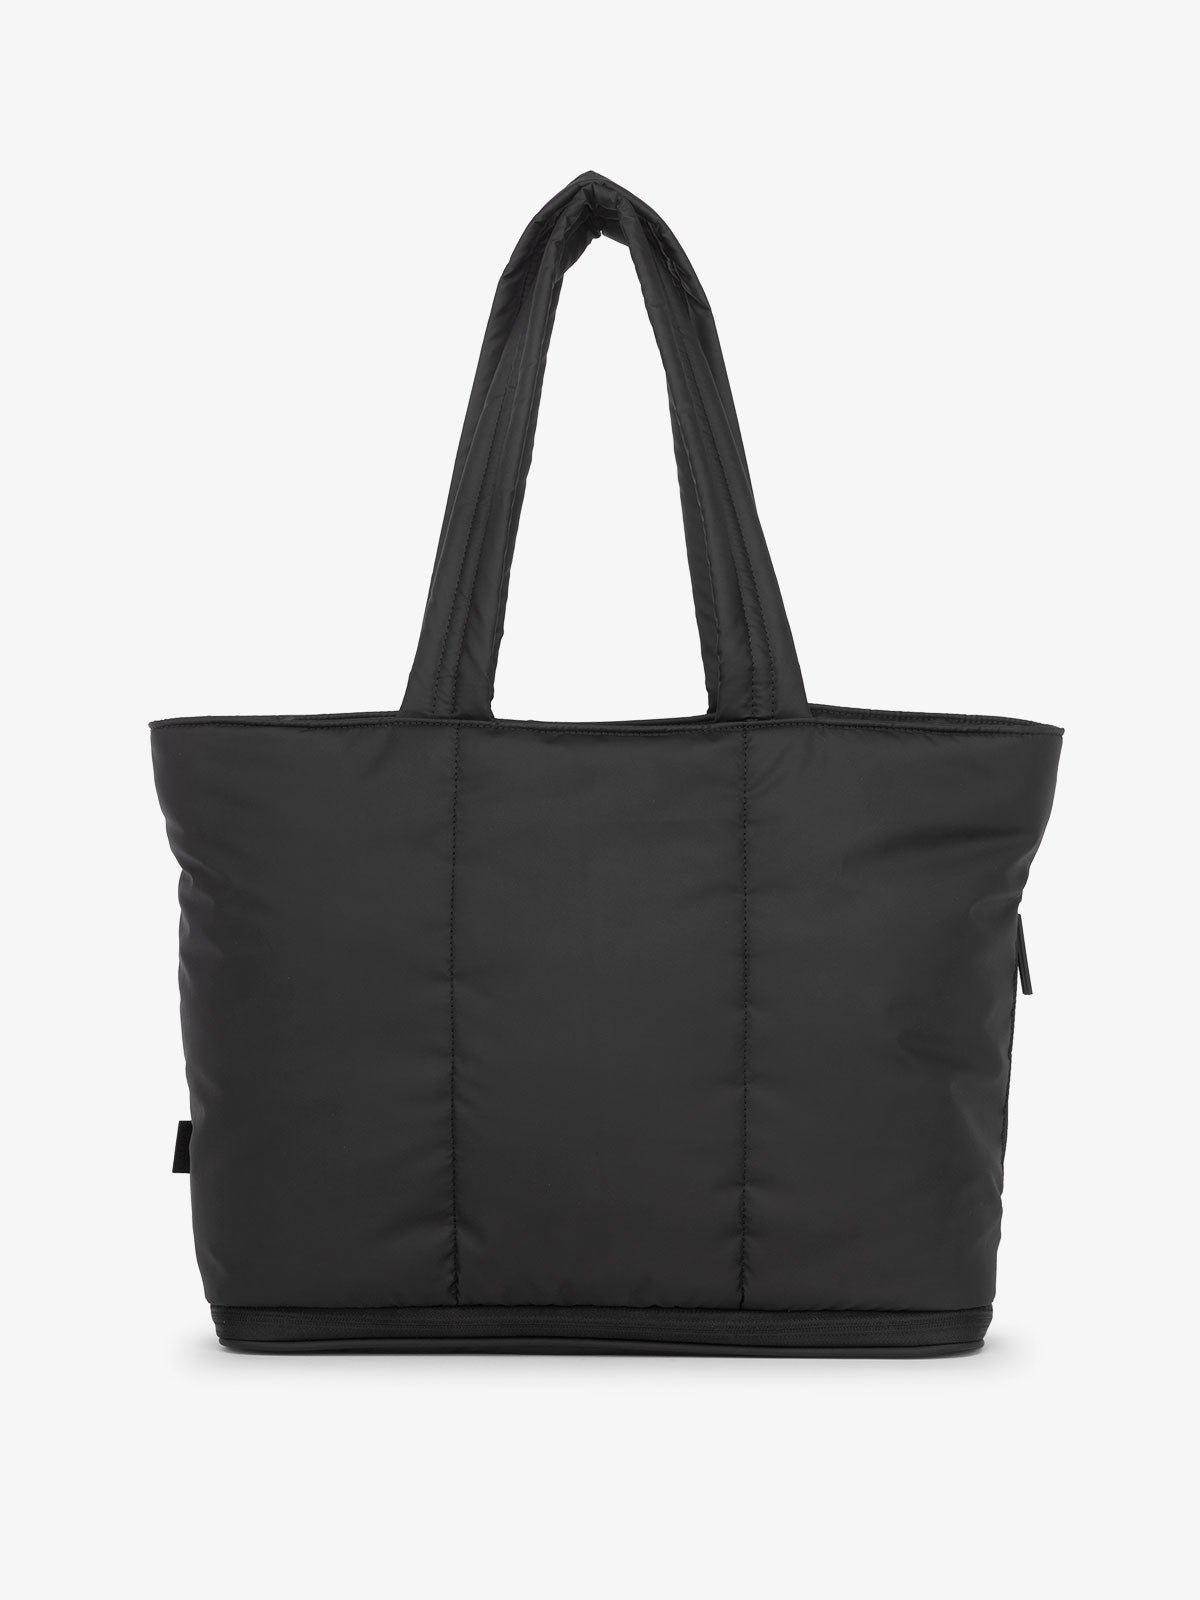 CALPAK Luka expandable shoulder tote bag with laptop compartment in black